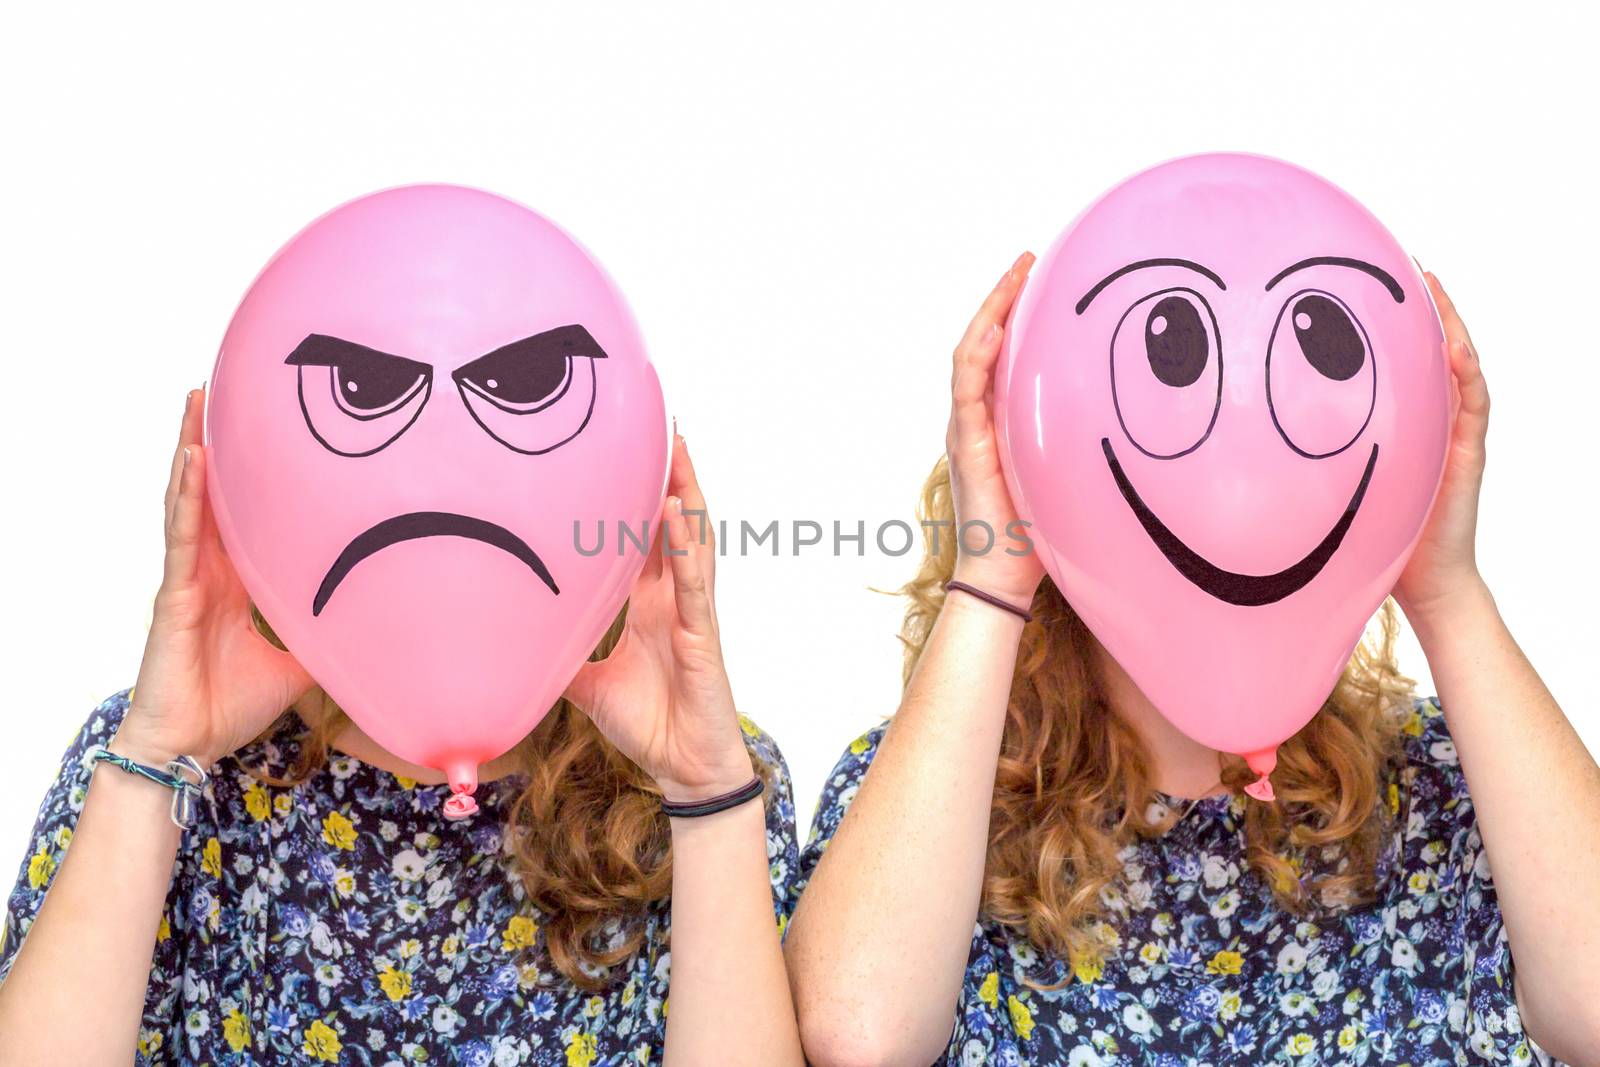 Two girls holding pink balloons with facial expressions of frustrated and smiling face isolated on white background